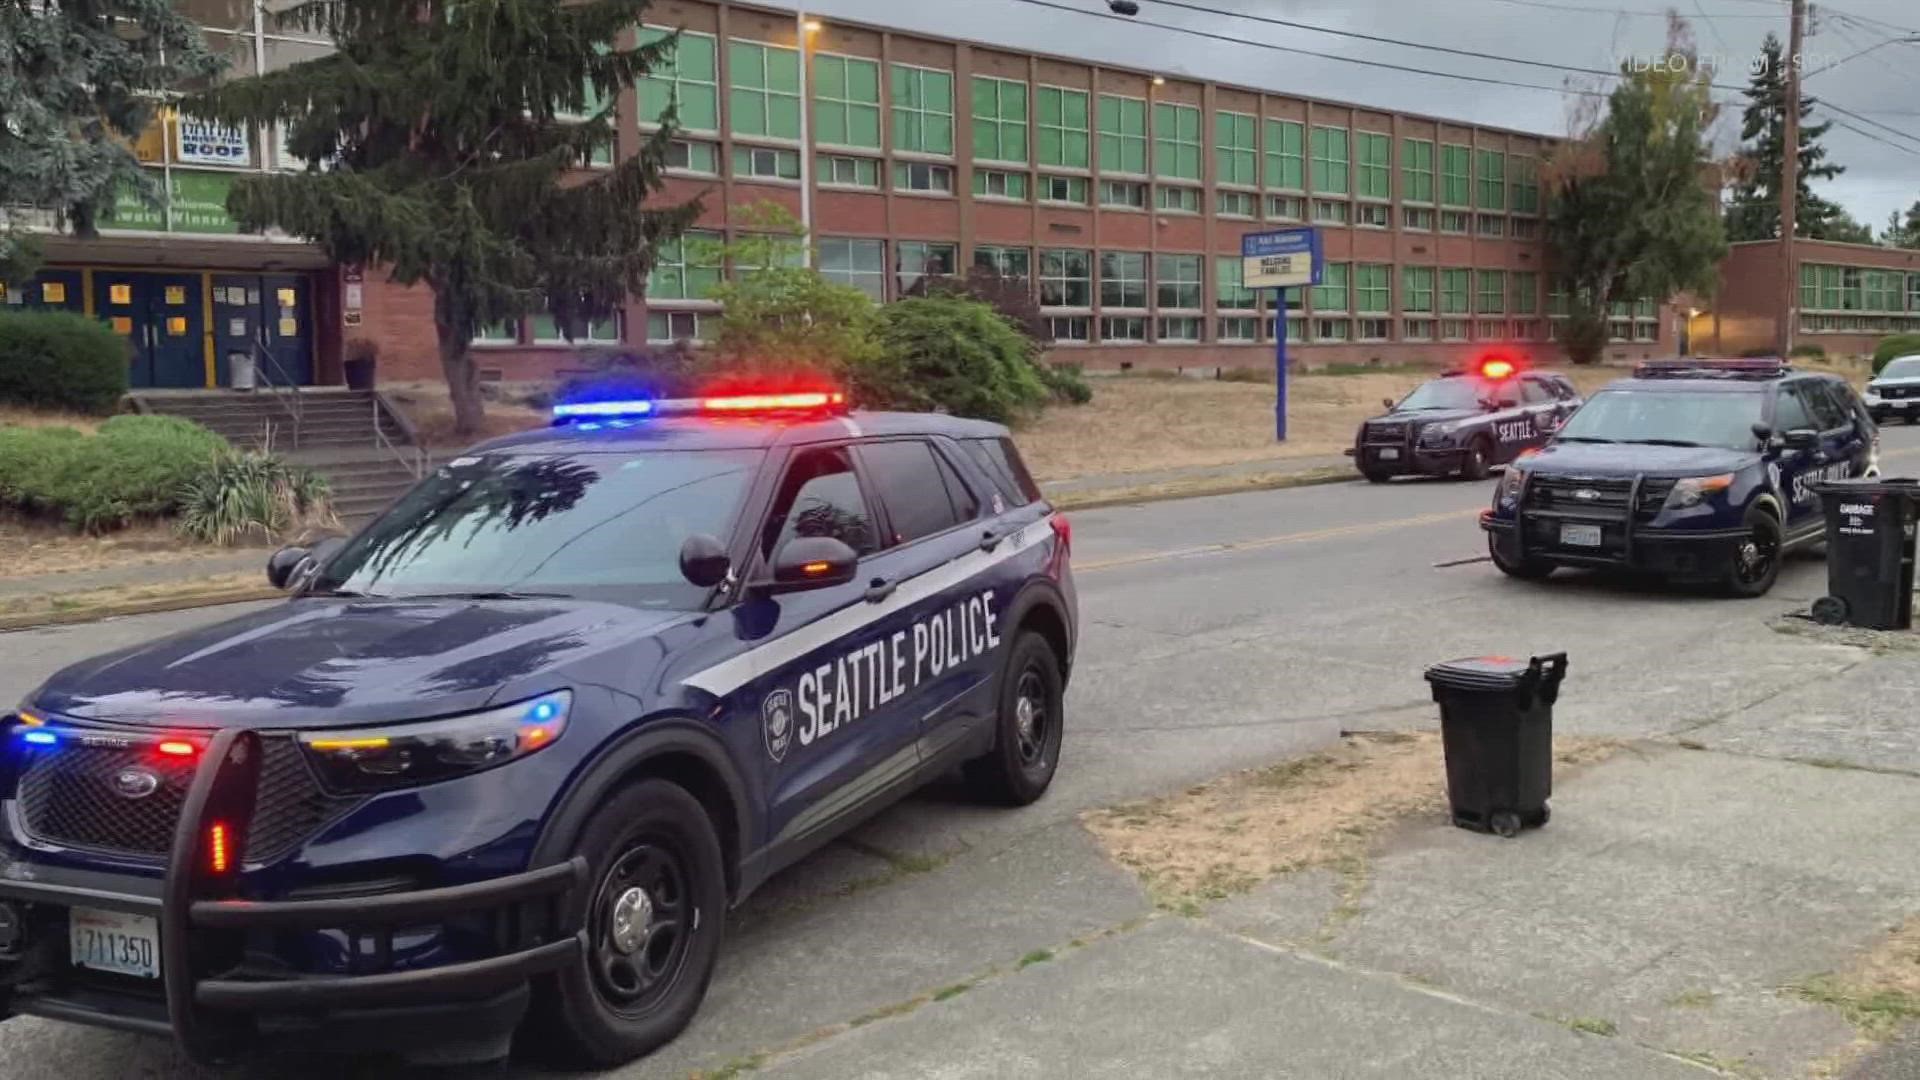 Seattle police said two teenagers exchanged gunfire outside of Aki Kurose Middle School Thursday evening.